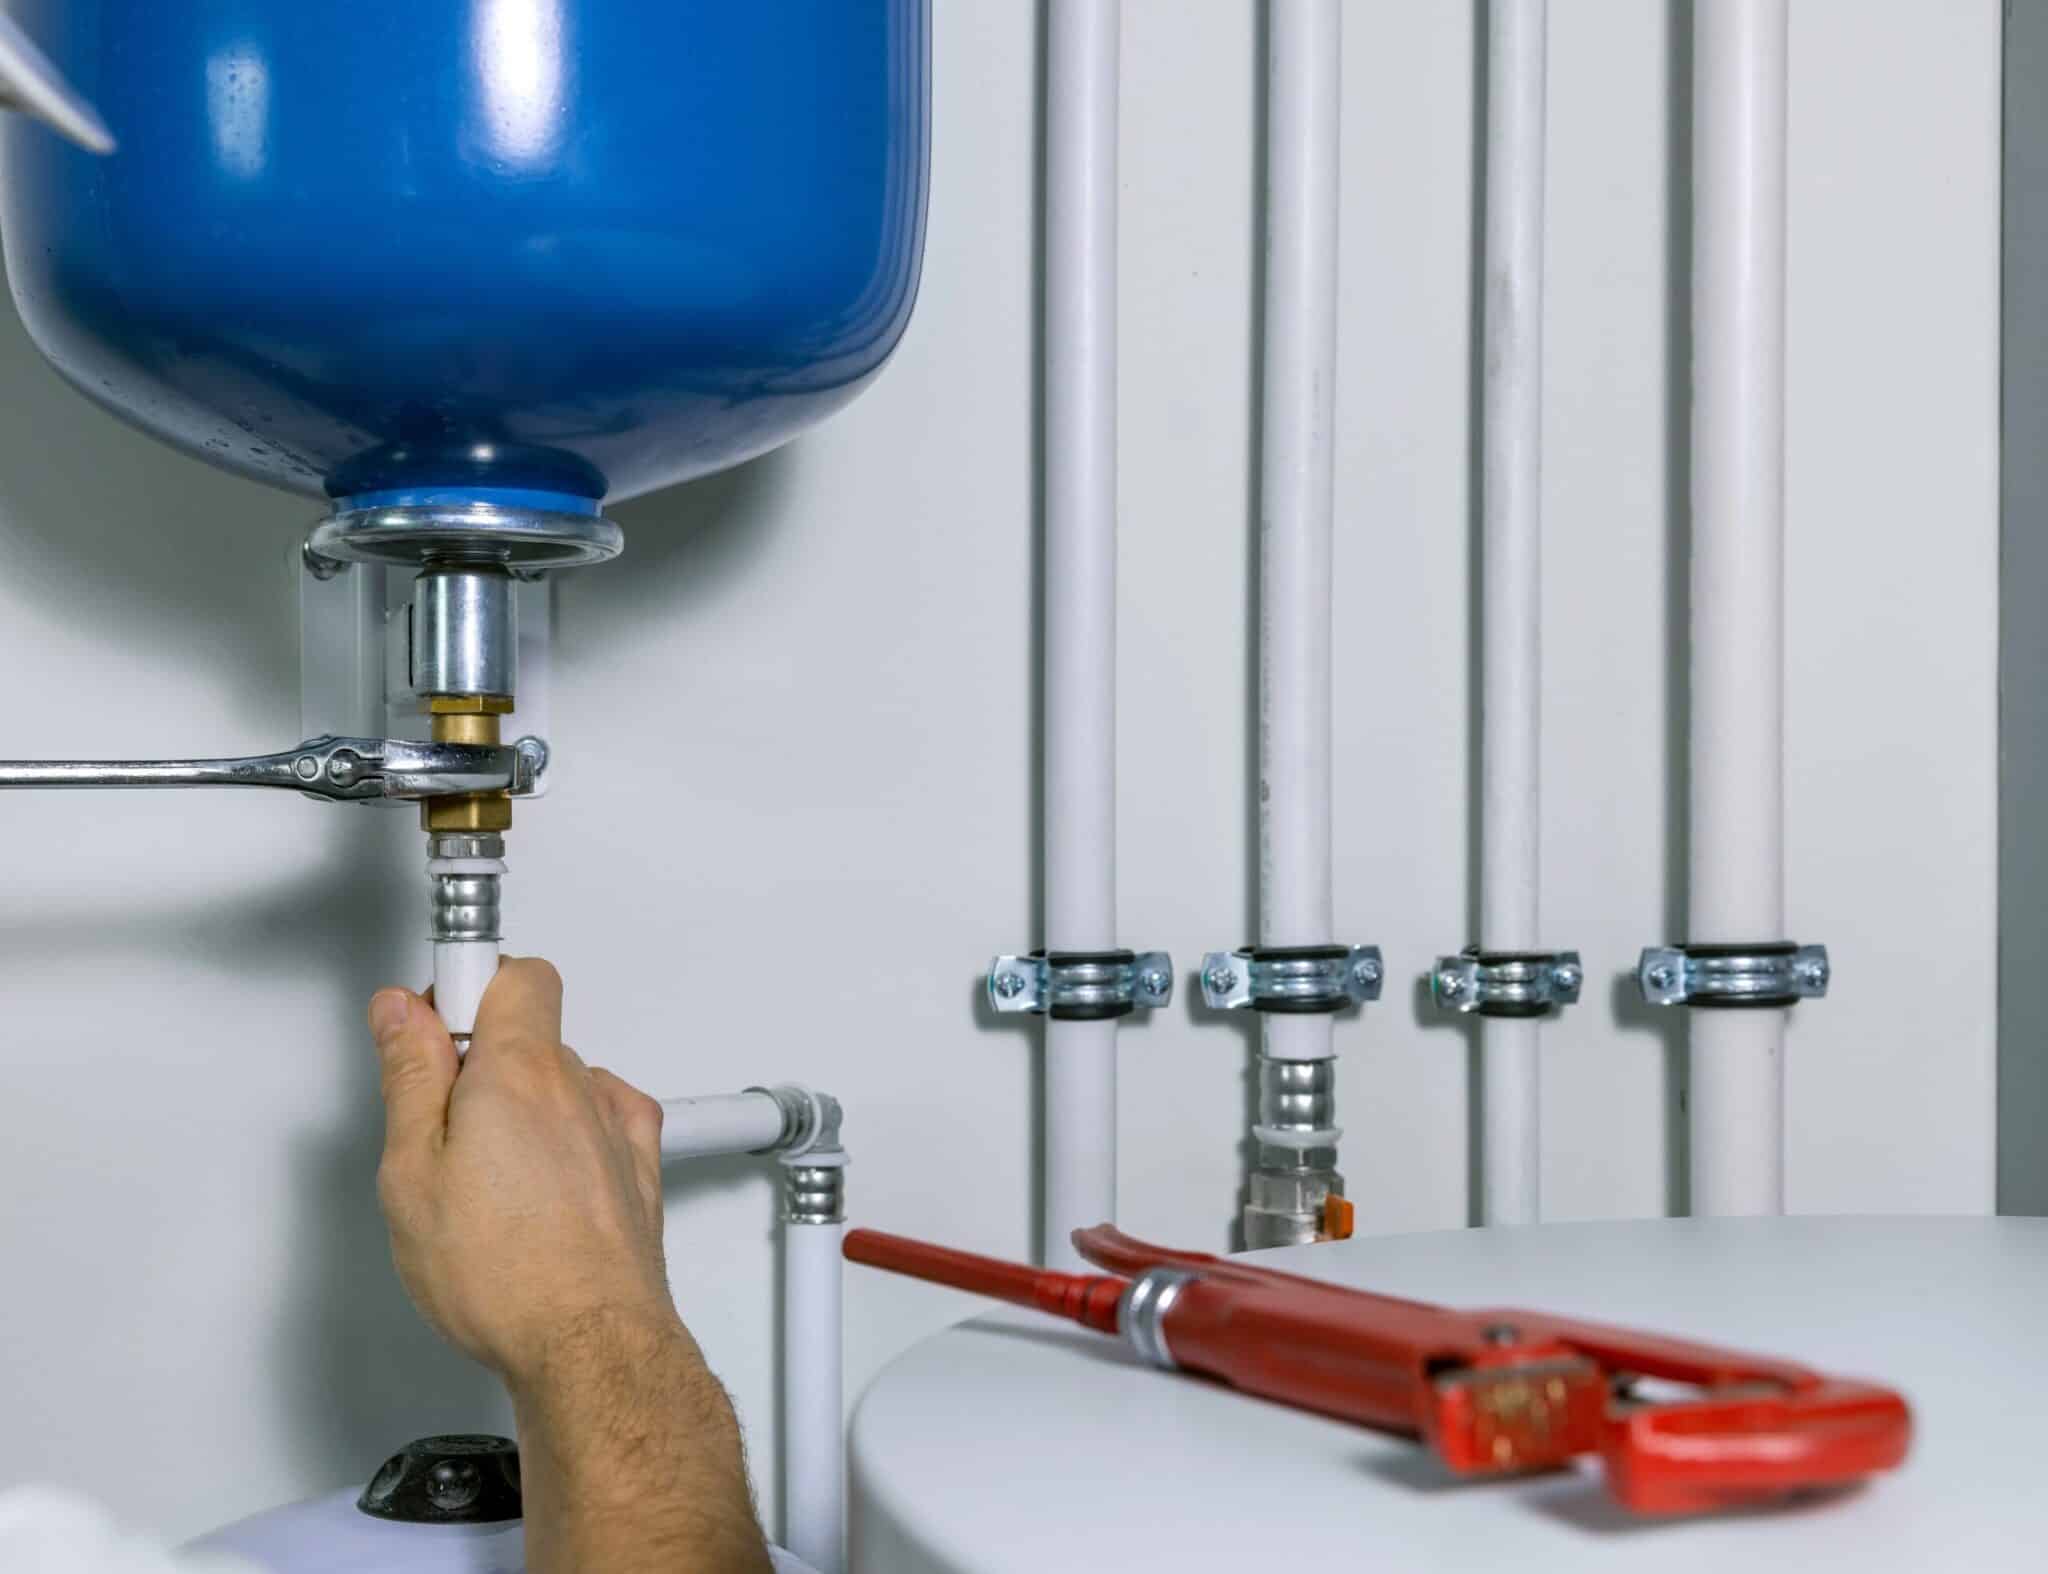 A plumber installing an expansion tank for a house heating system.